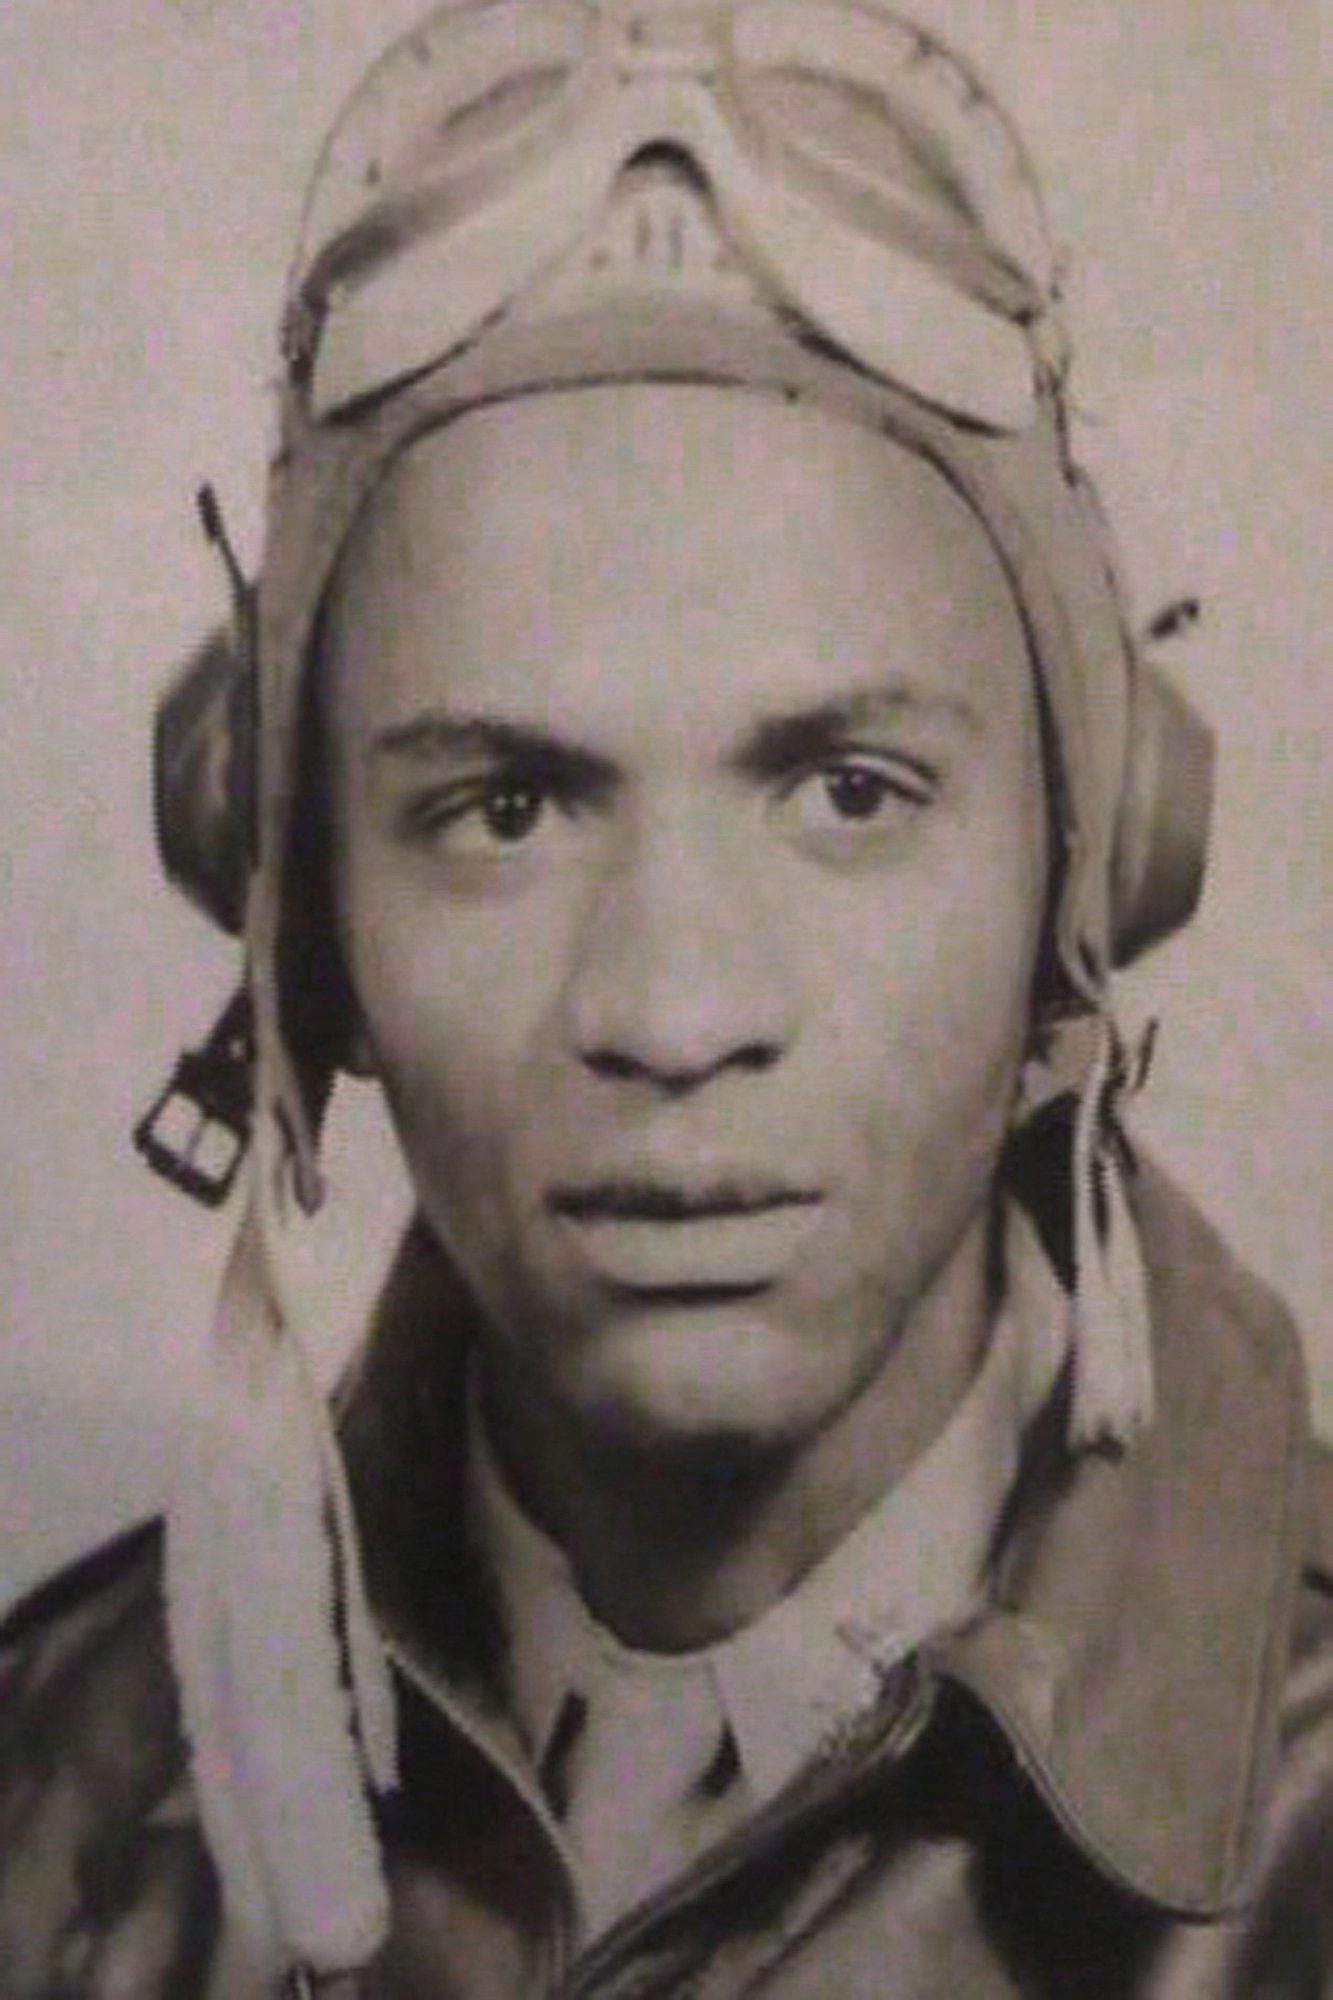 Tuskegee Airman James Bowman poses for a photograph on the occasion of his graduation from the Tuskegee Institute, Tuskegee, Alabama in January, 1945.  Photo courtesy of the Iowa Gold Star Military Museum, Camp Dodge, Iowa.  (US Army Air Corps photo/Unknown)(Released)